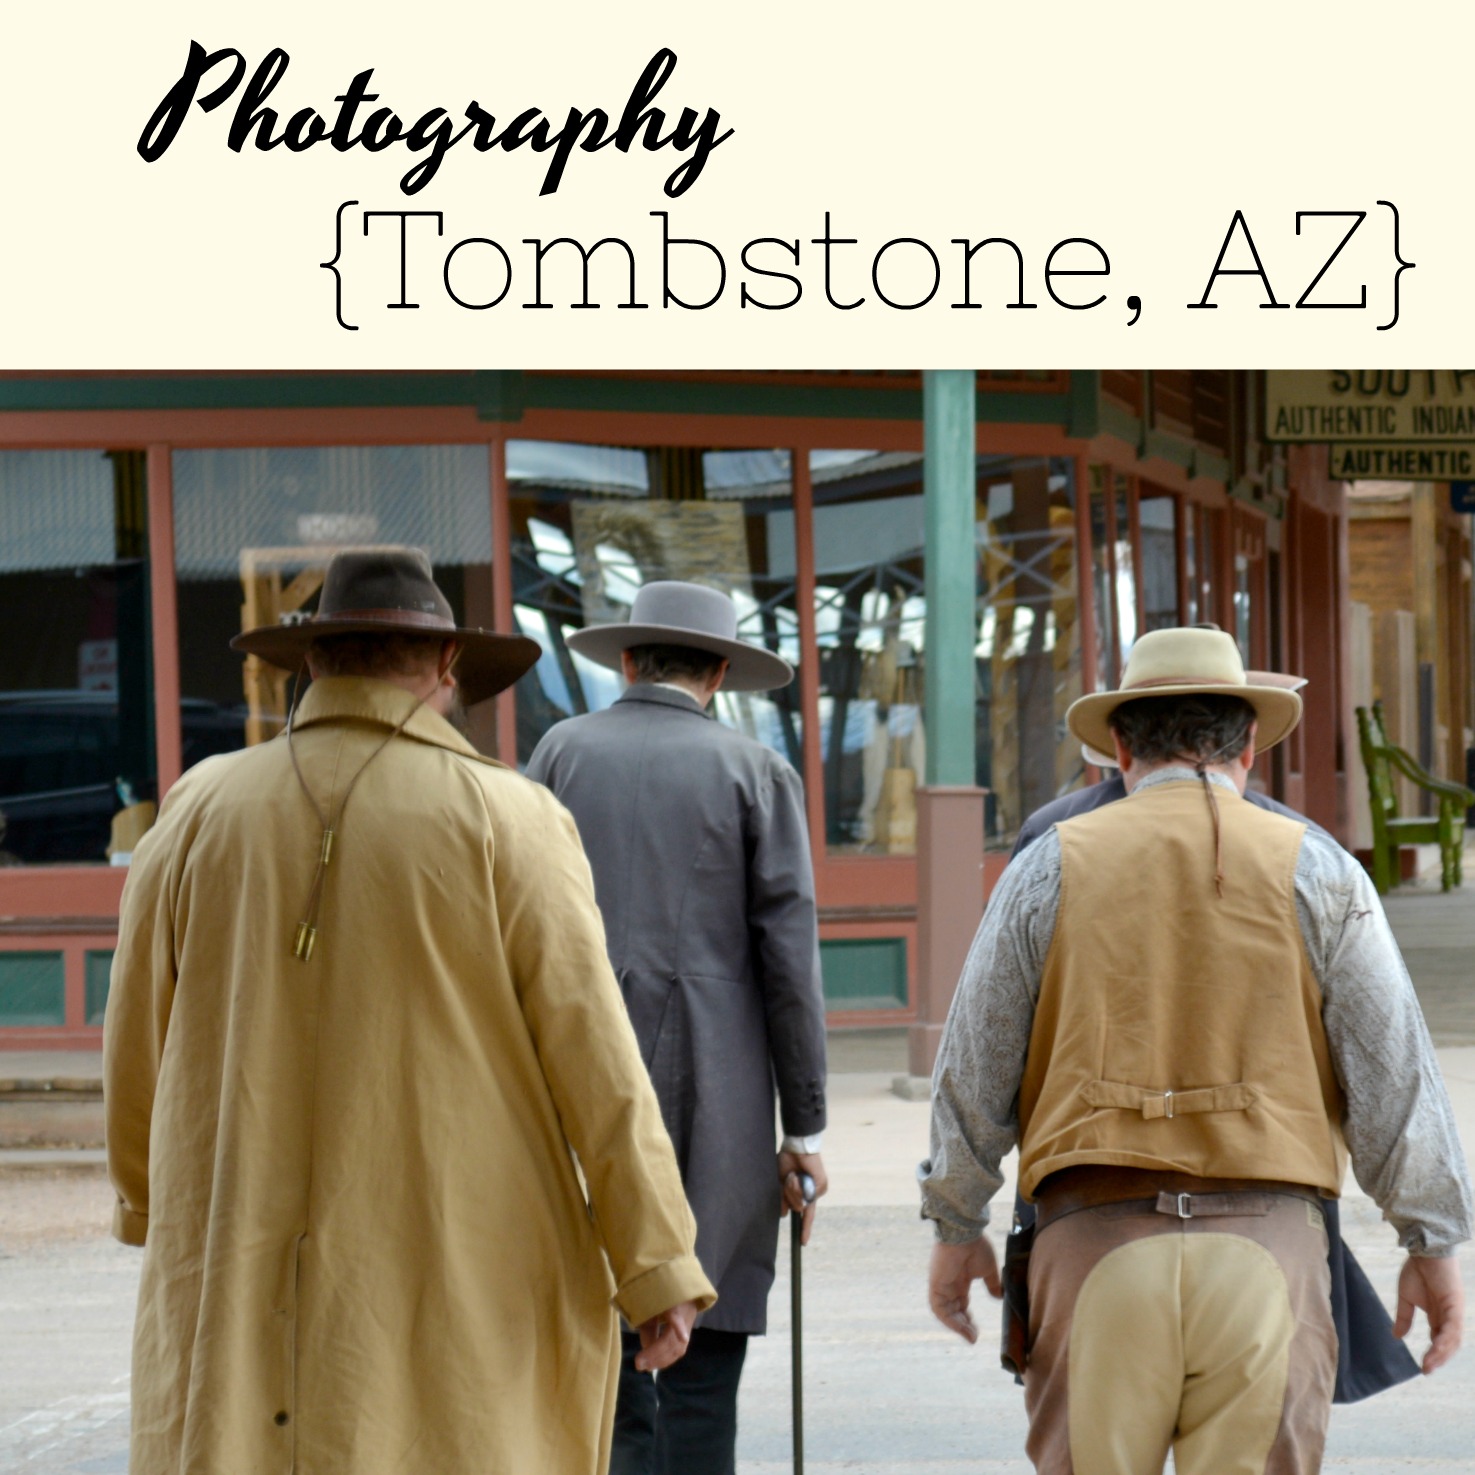 Tombstone- Photography